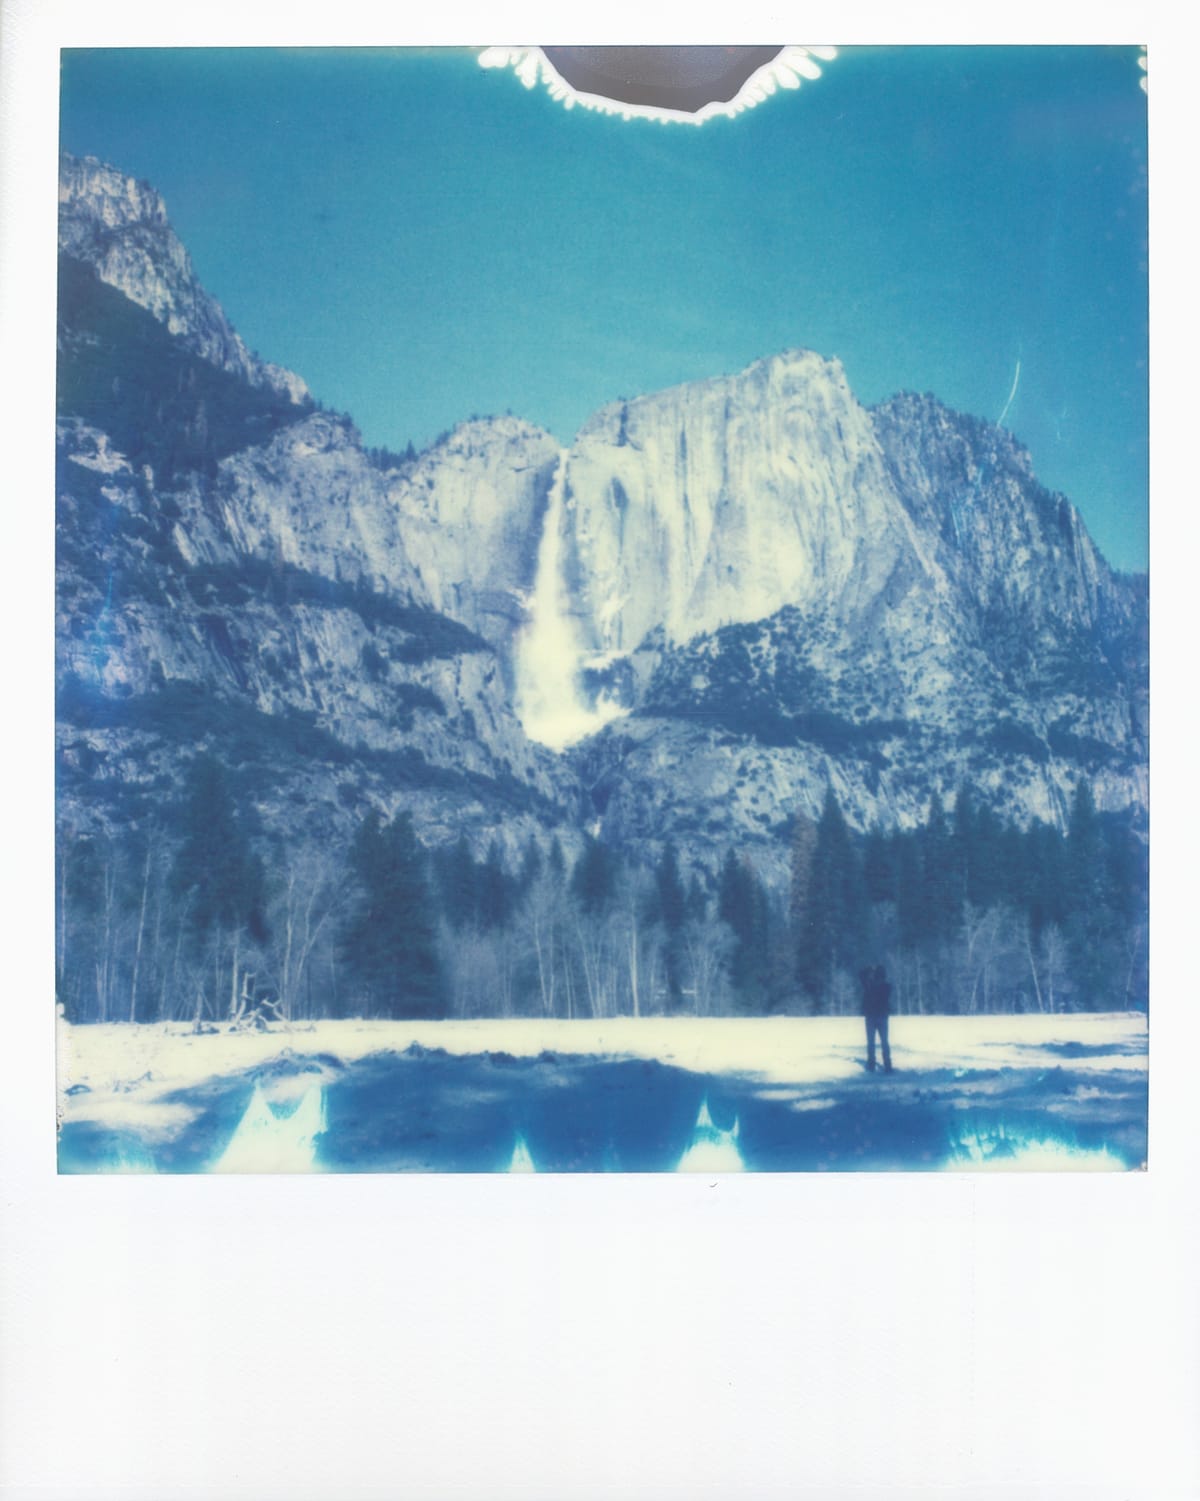 Scan of an Impossible Project film photo taken at Yosemite showing a waterfall in winter, a person below taking a picture